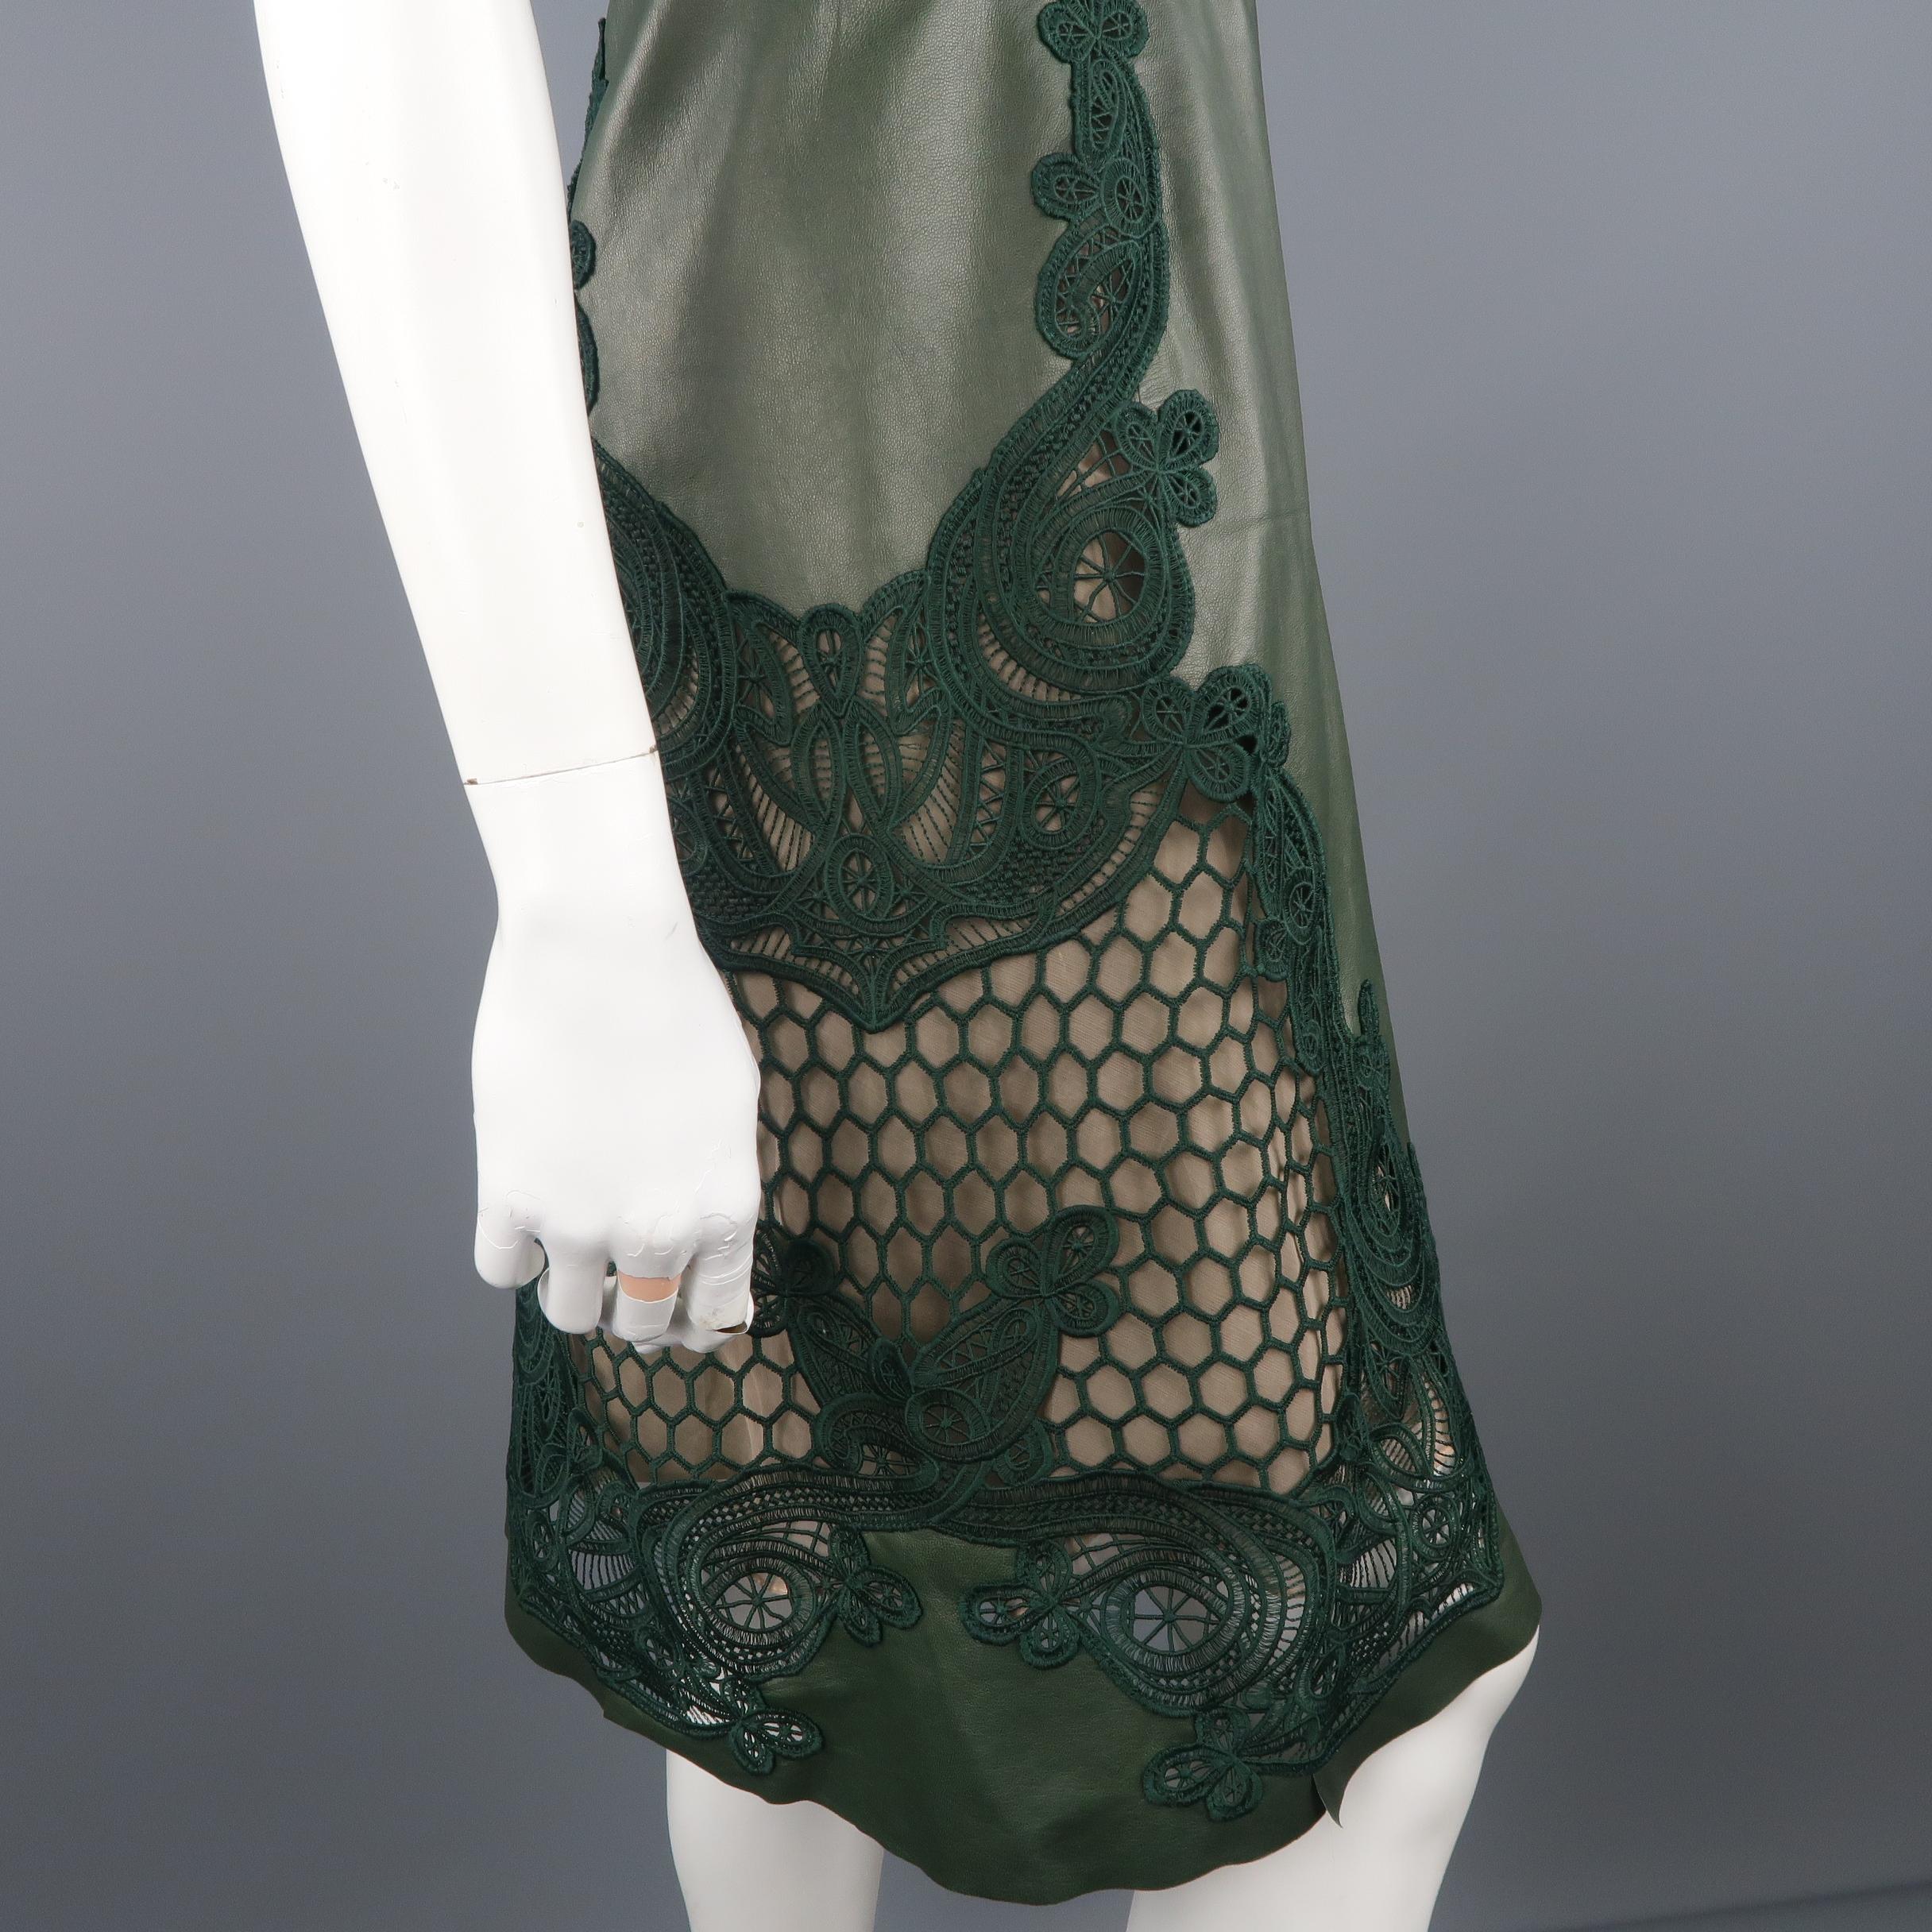 Gucci Green Leather Broderie Anglaise Cocktail Dress, Spring 2015 Runway 1